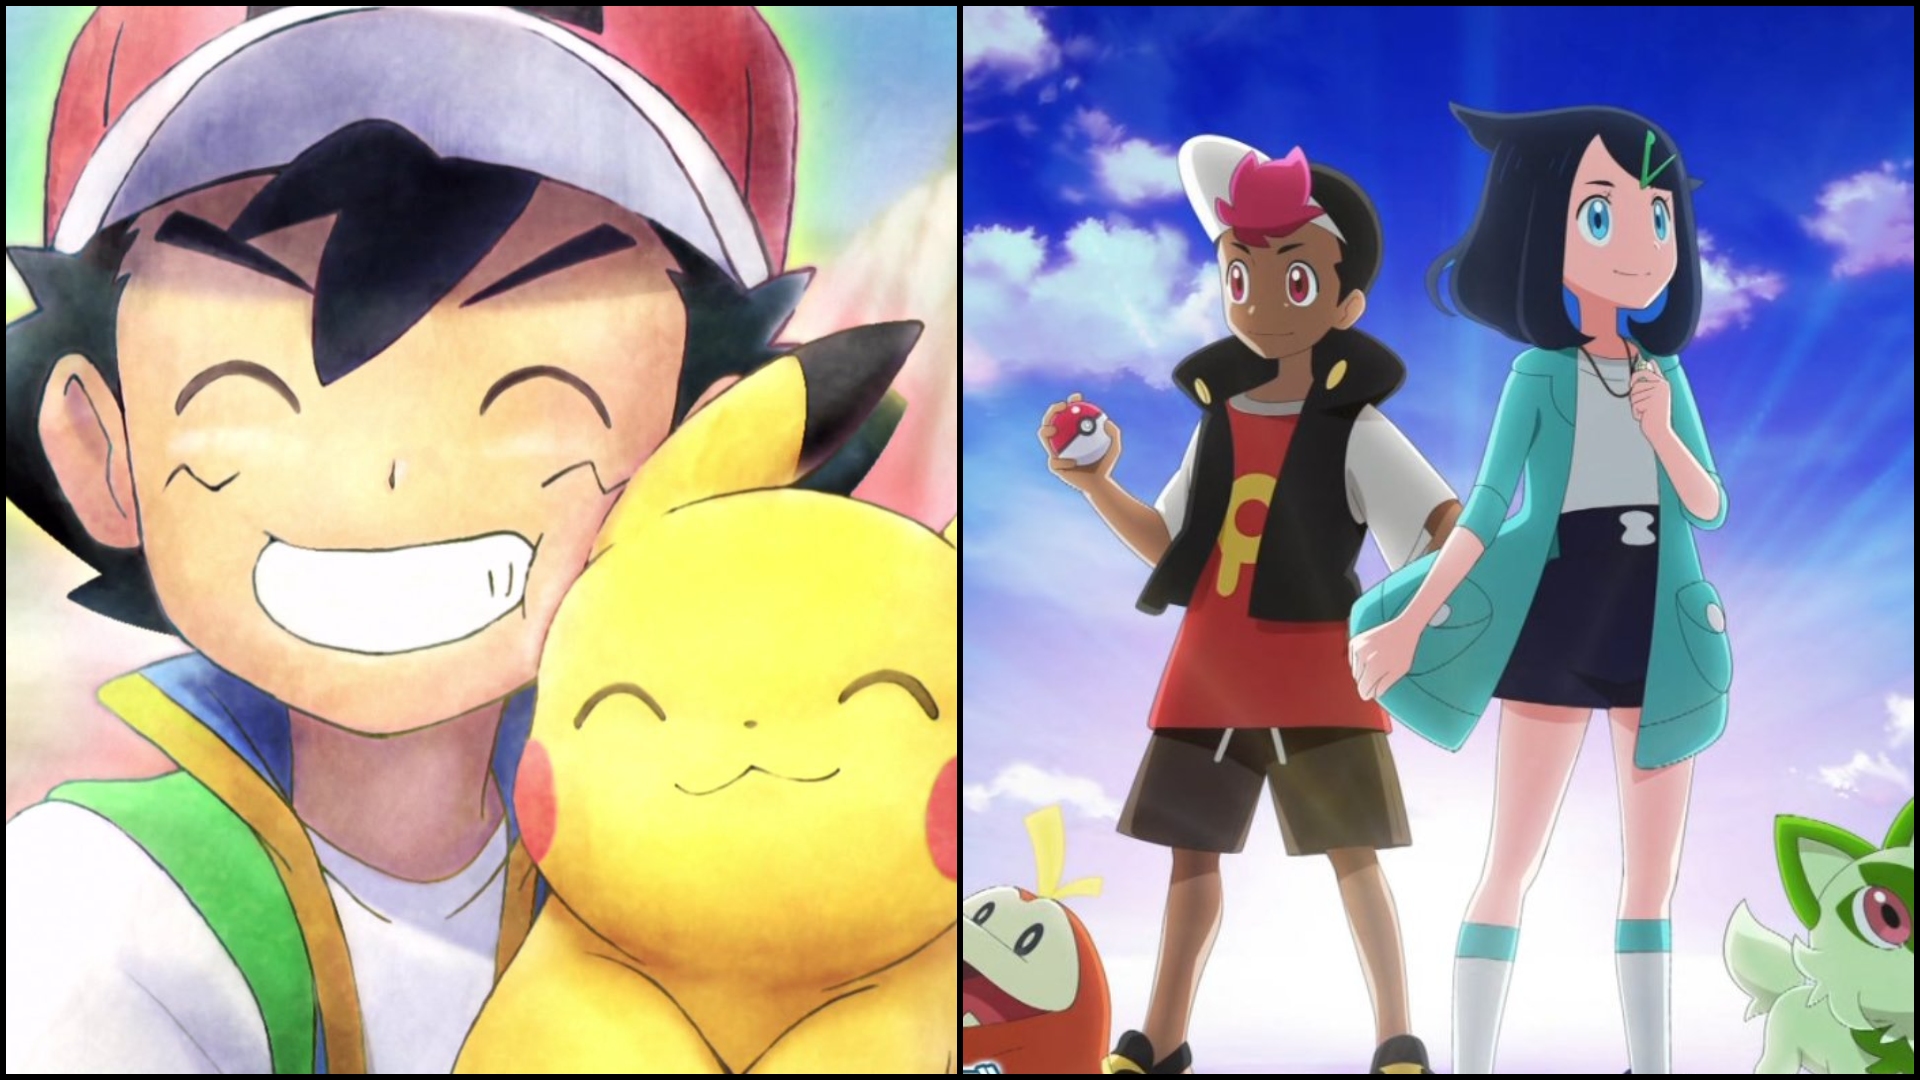 New Mobile Game Pokémon Masters Is More About People Than Pocket Monsters